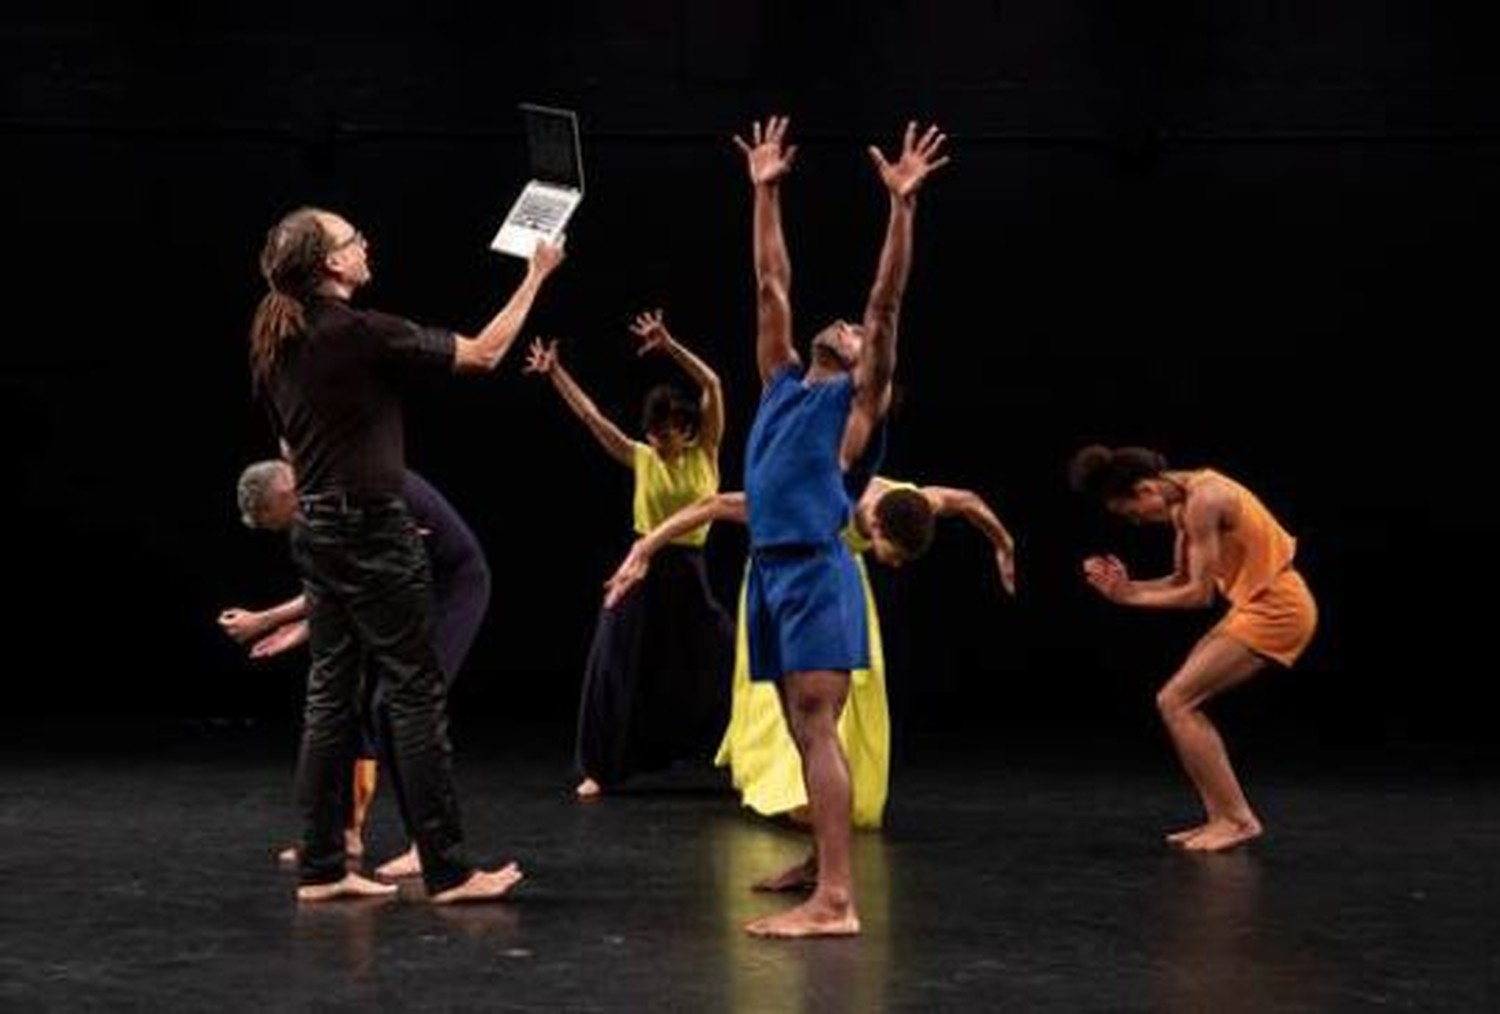 Award winning choreographer and Princeton Arts Fellow Netta Yerushalmy and Company Artist Residency at UVA, supported by an Arts Council Grant.